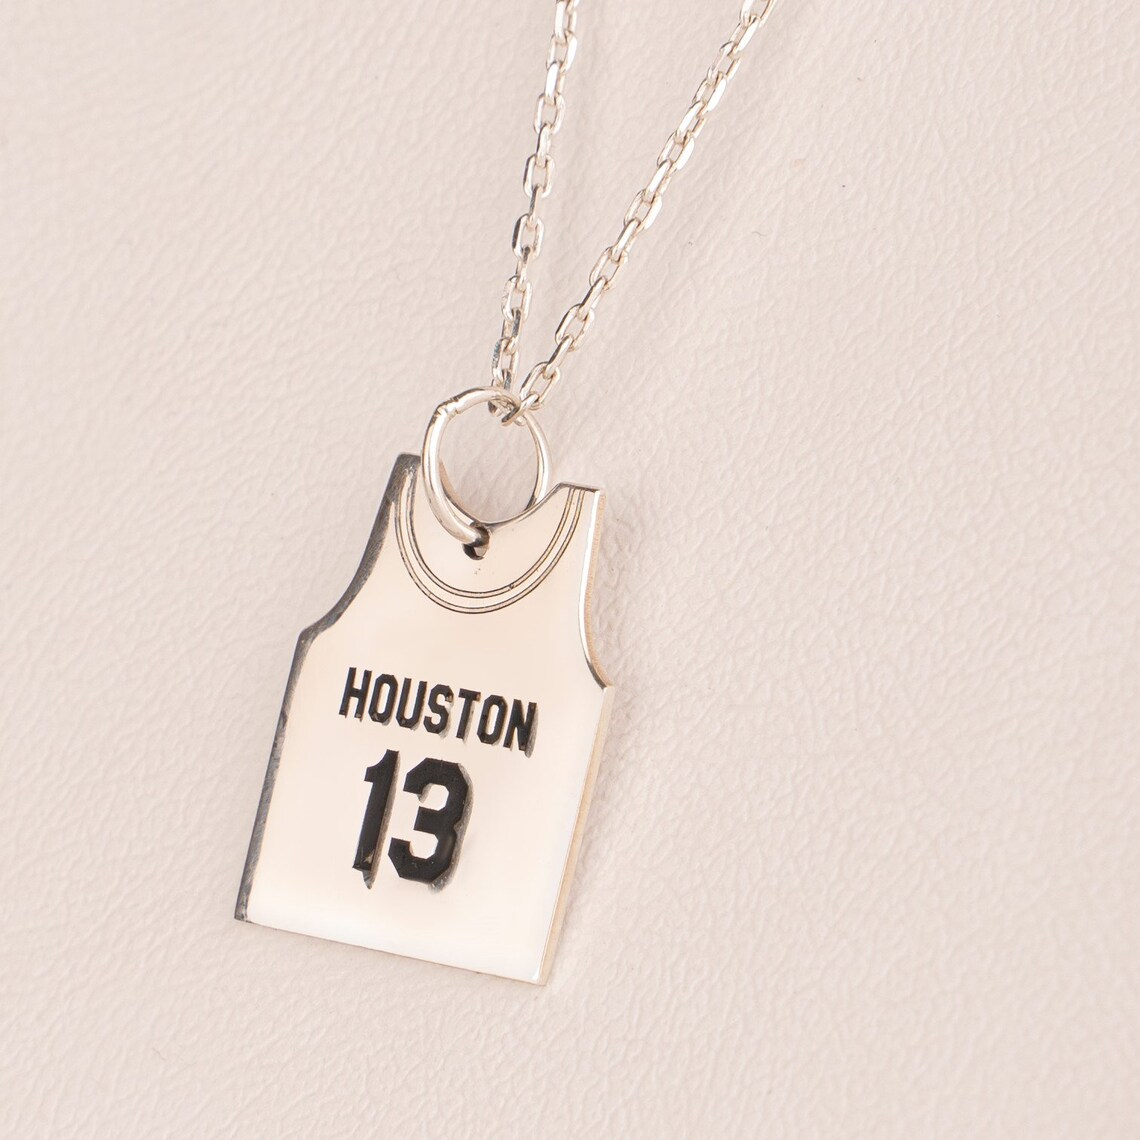 Personalized Basketball Kits Necklace with Sports Team and Custom Number Necklace-silviax